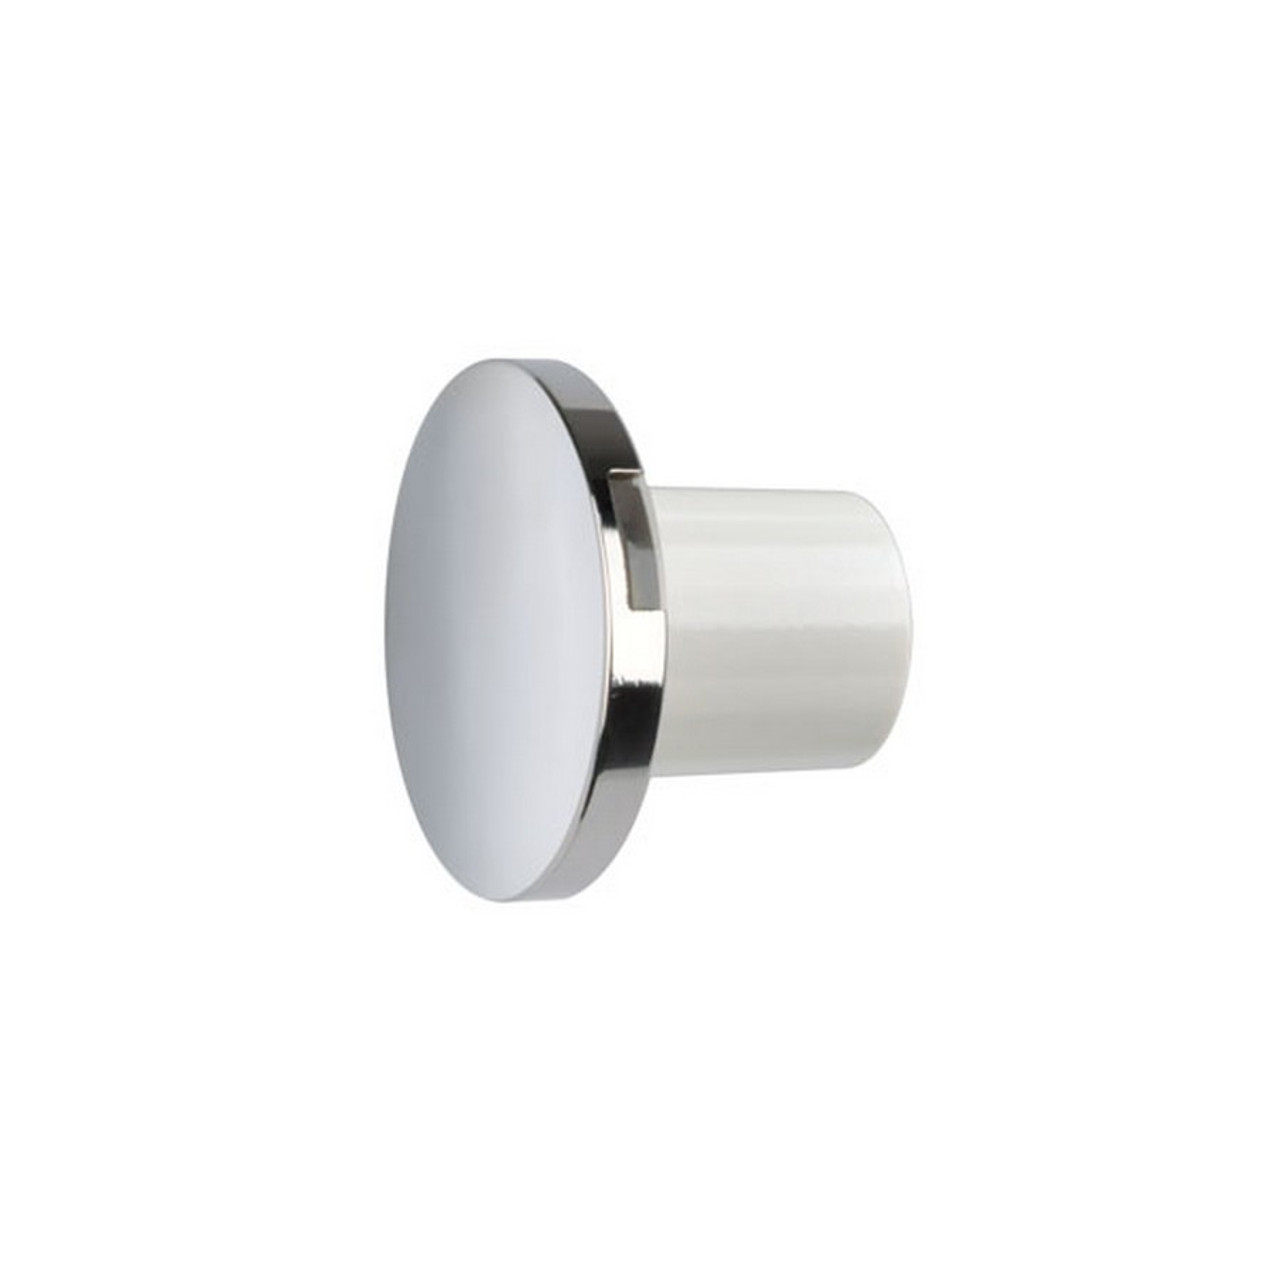 Quick Marine - Margot 2L CO38 Wall LED Courtesy Light (Warm White, 10/30V, Stainless Steel) (FASP2532UX2CA00) - Apollo Lighting